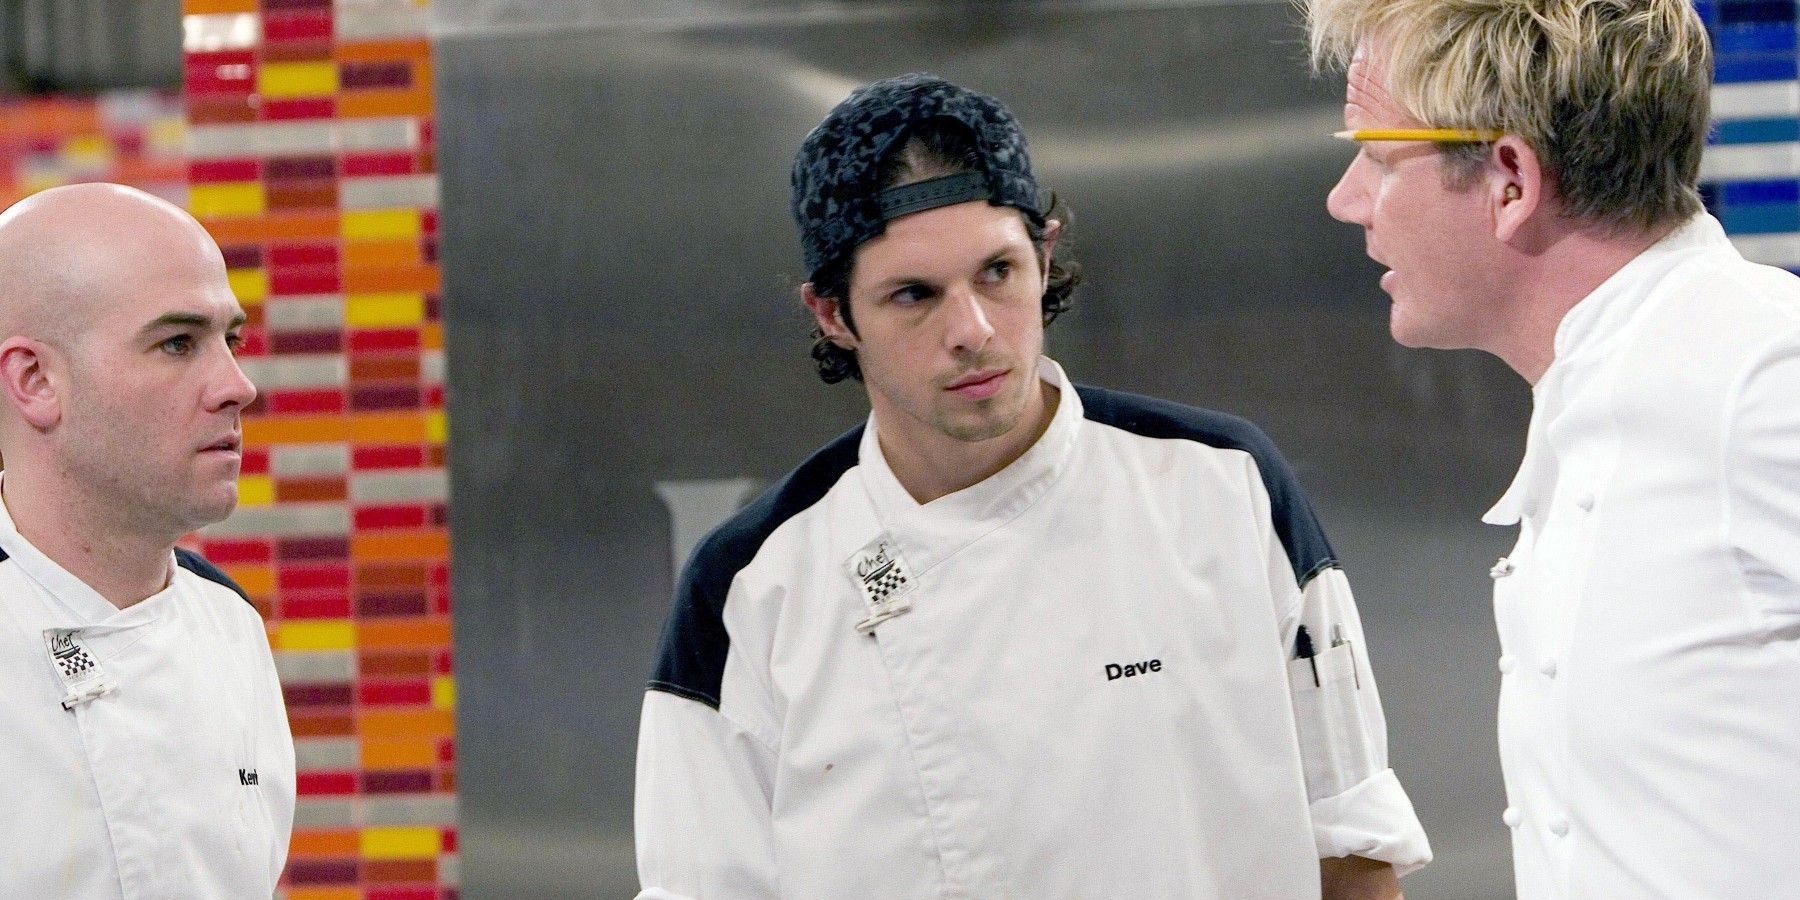 dave levey hell's kitchen talking to Chef Ramsay and another cast member